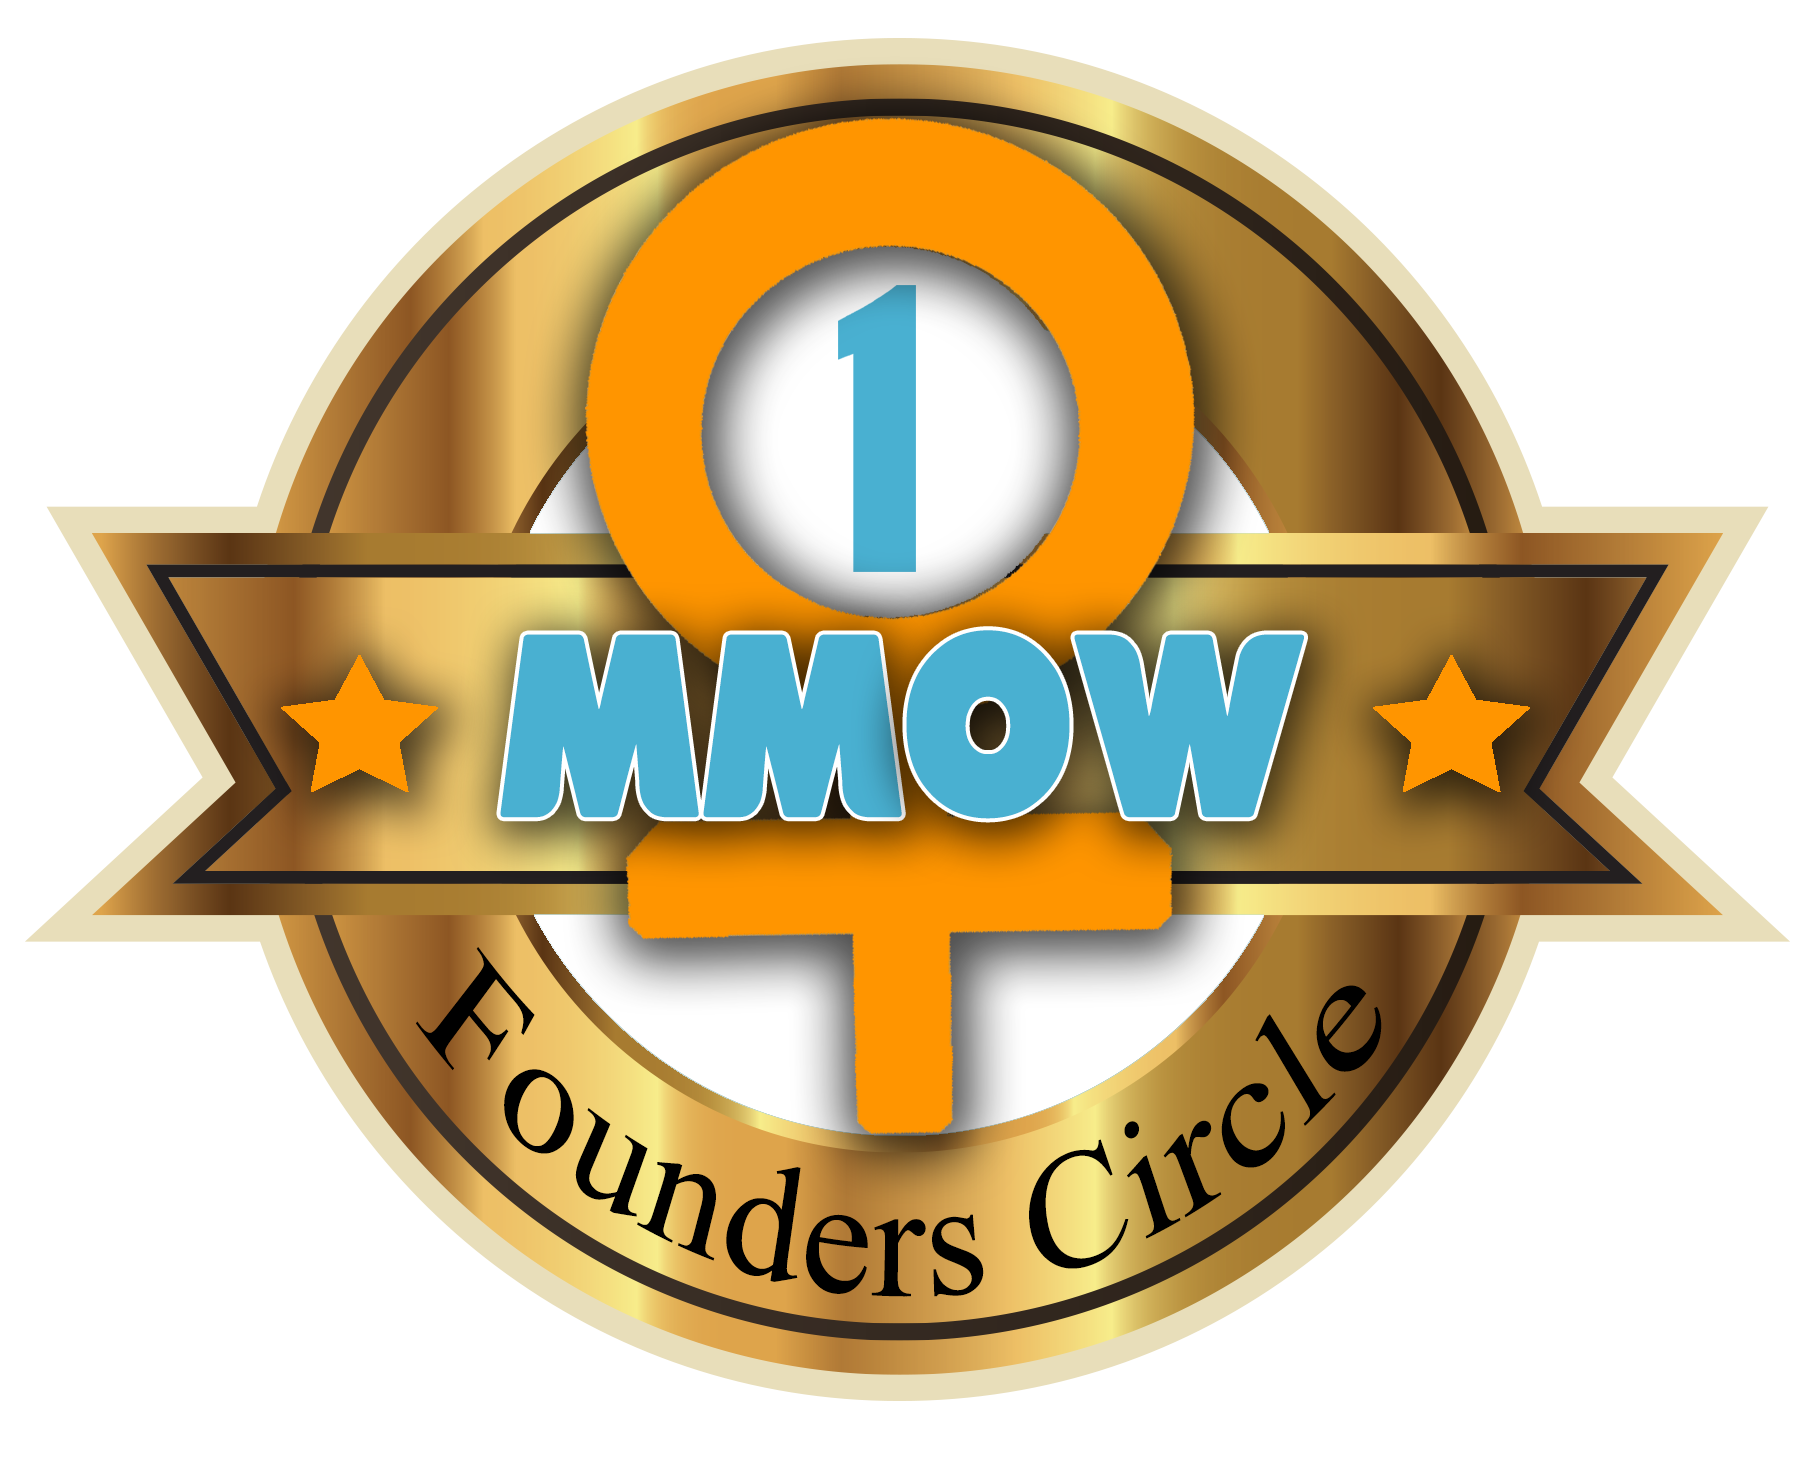 ommmow founders circle